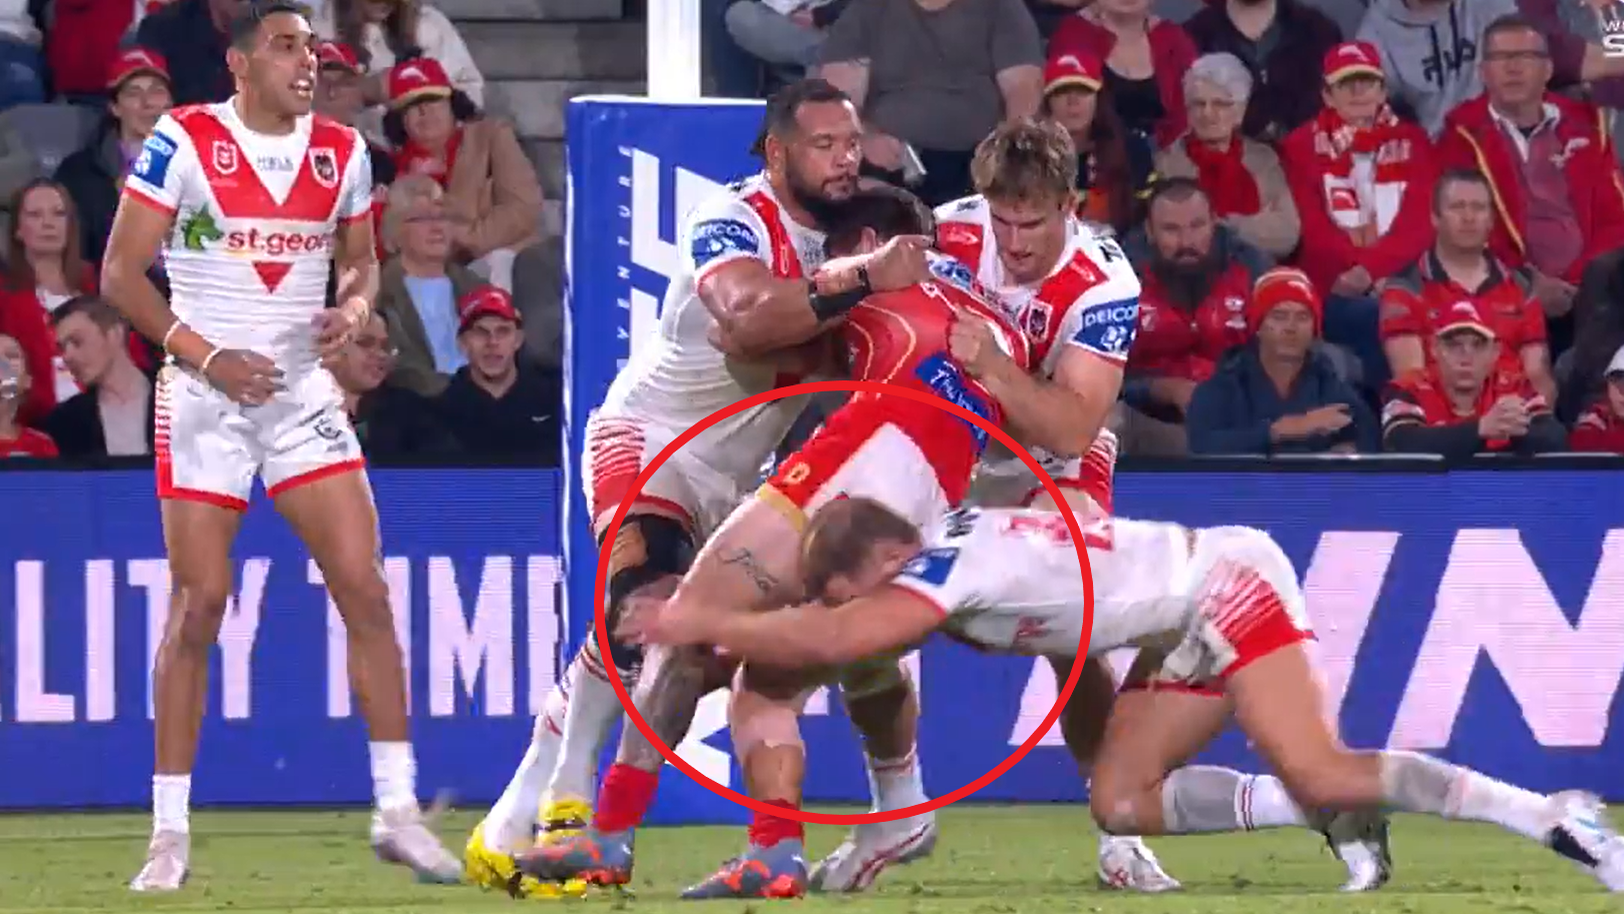 'I was pretty shocked': Dragons captain Jack De Belin escapes ban for dangerous tackle in loss to Dolphins